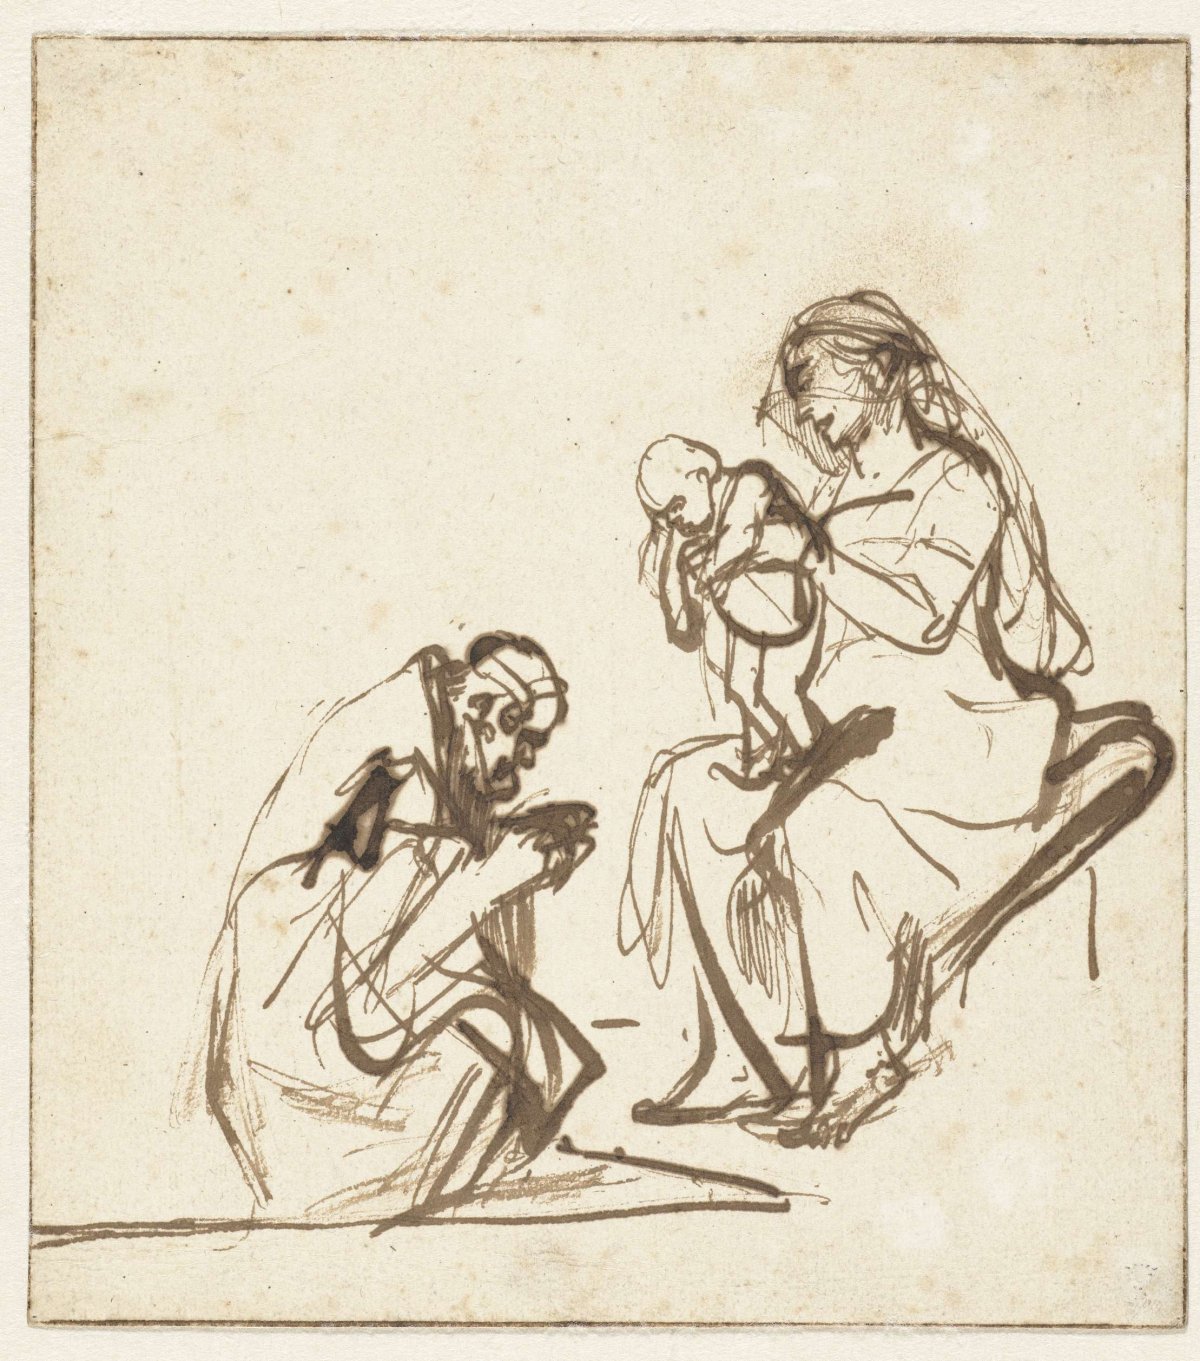 One of the Three Kings Adoring the Virgin and Child, Rembrandt van Rijn, c. 1635 - c. 1640